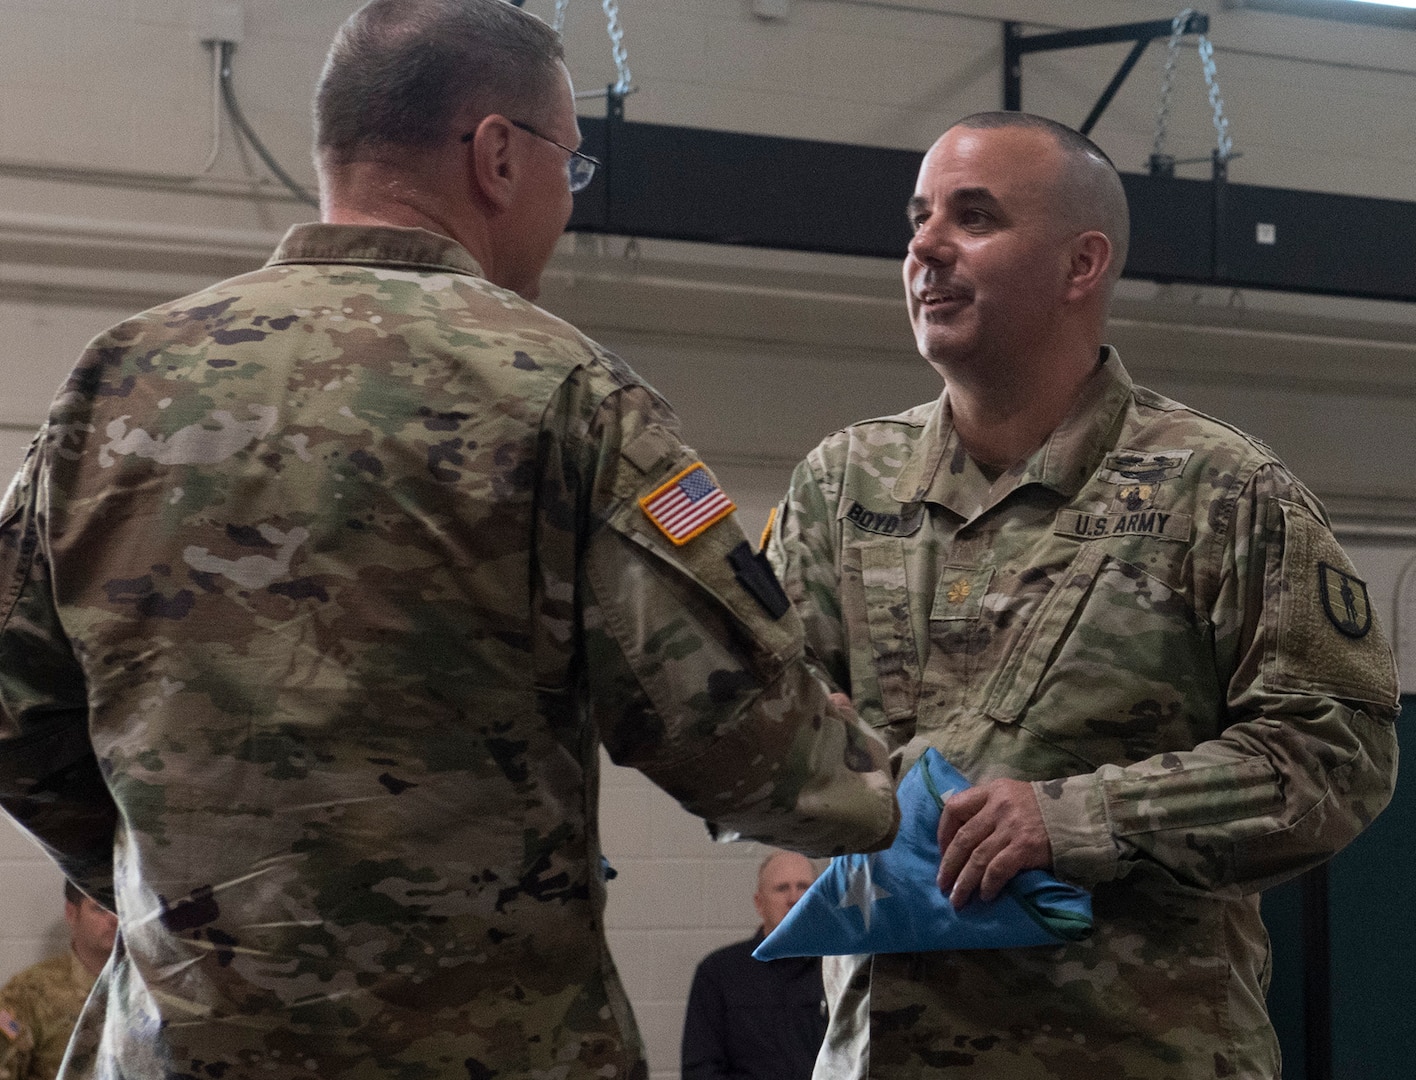 Maj. Jasen Boyd, commanding officer for Task Force Mansfield, receives a Vermont battle flag from Maj. Gen. Greg Knight, the state’s adjutant general, during a sendoff ceremony at Camp Johnson, Vermont, May 18, 2021. The task force will deploy to the U.S. European Command area of responsibility for one year. (U.S. Army National Guard photo by Don Branum)